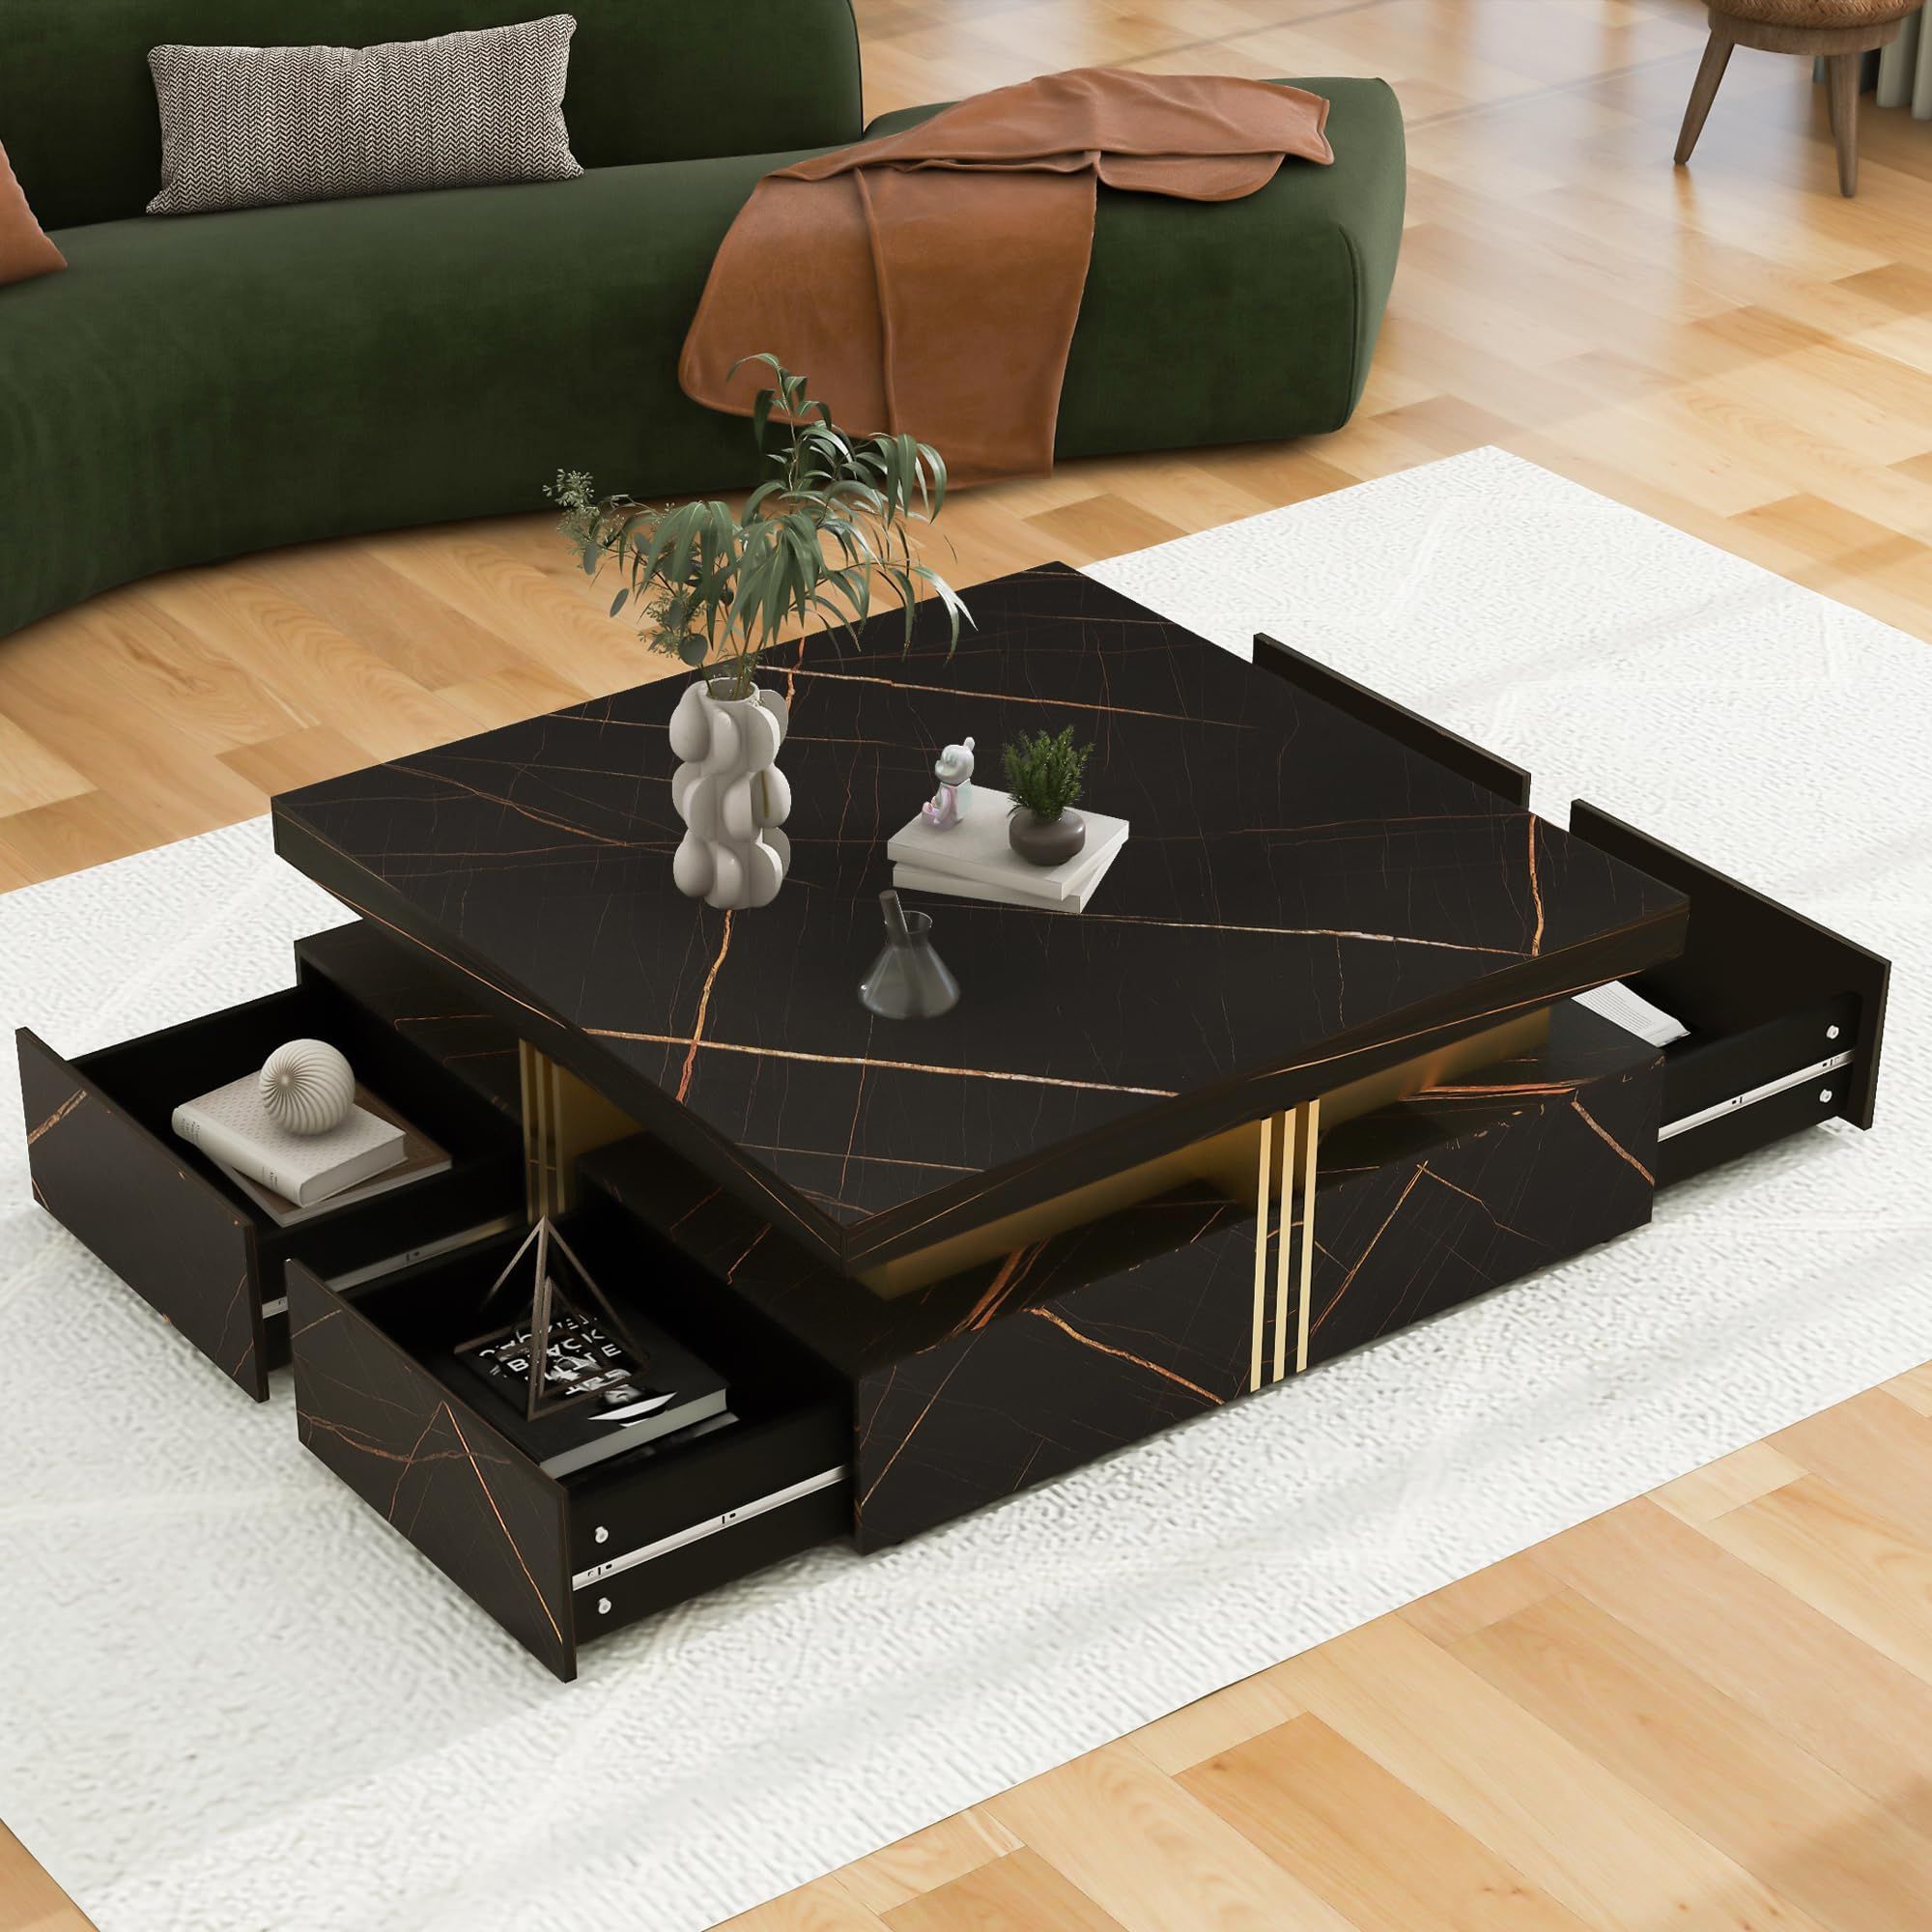 Transitional Square Coffee Tables With Regard To 2020 Amazon: Square Coffee Table With Storage Drawers For Living Room Mid  Century Modern Tea Table Unique Center Table Small Cocktail Tables For  Apartment, Black : Home & Kitchen (Photo 2 of 10)